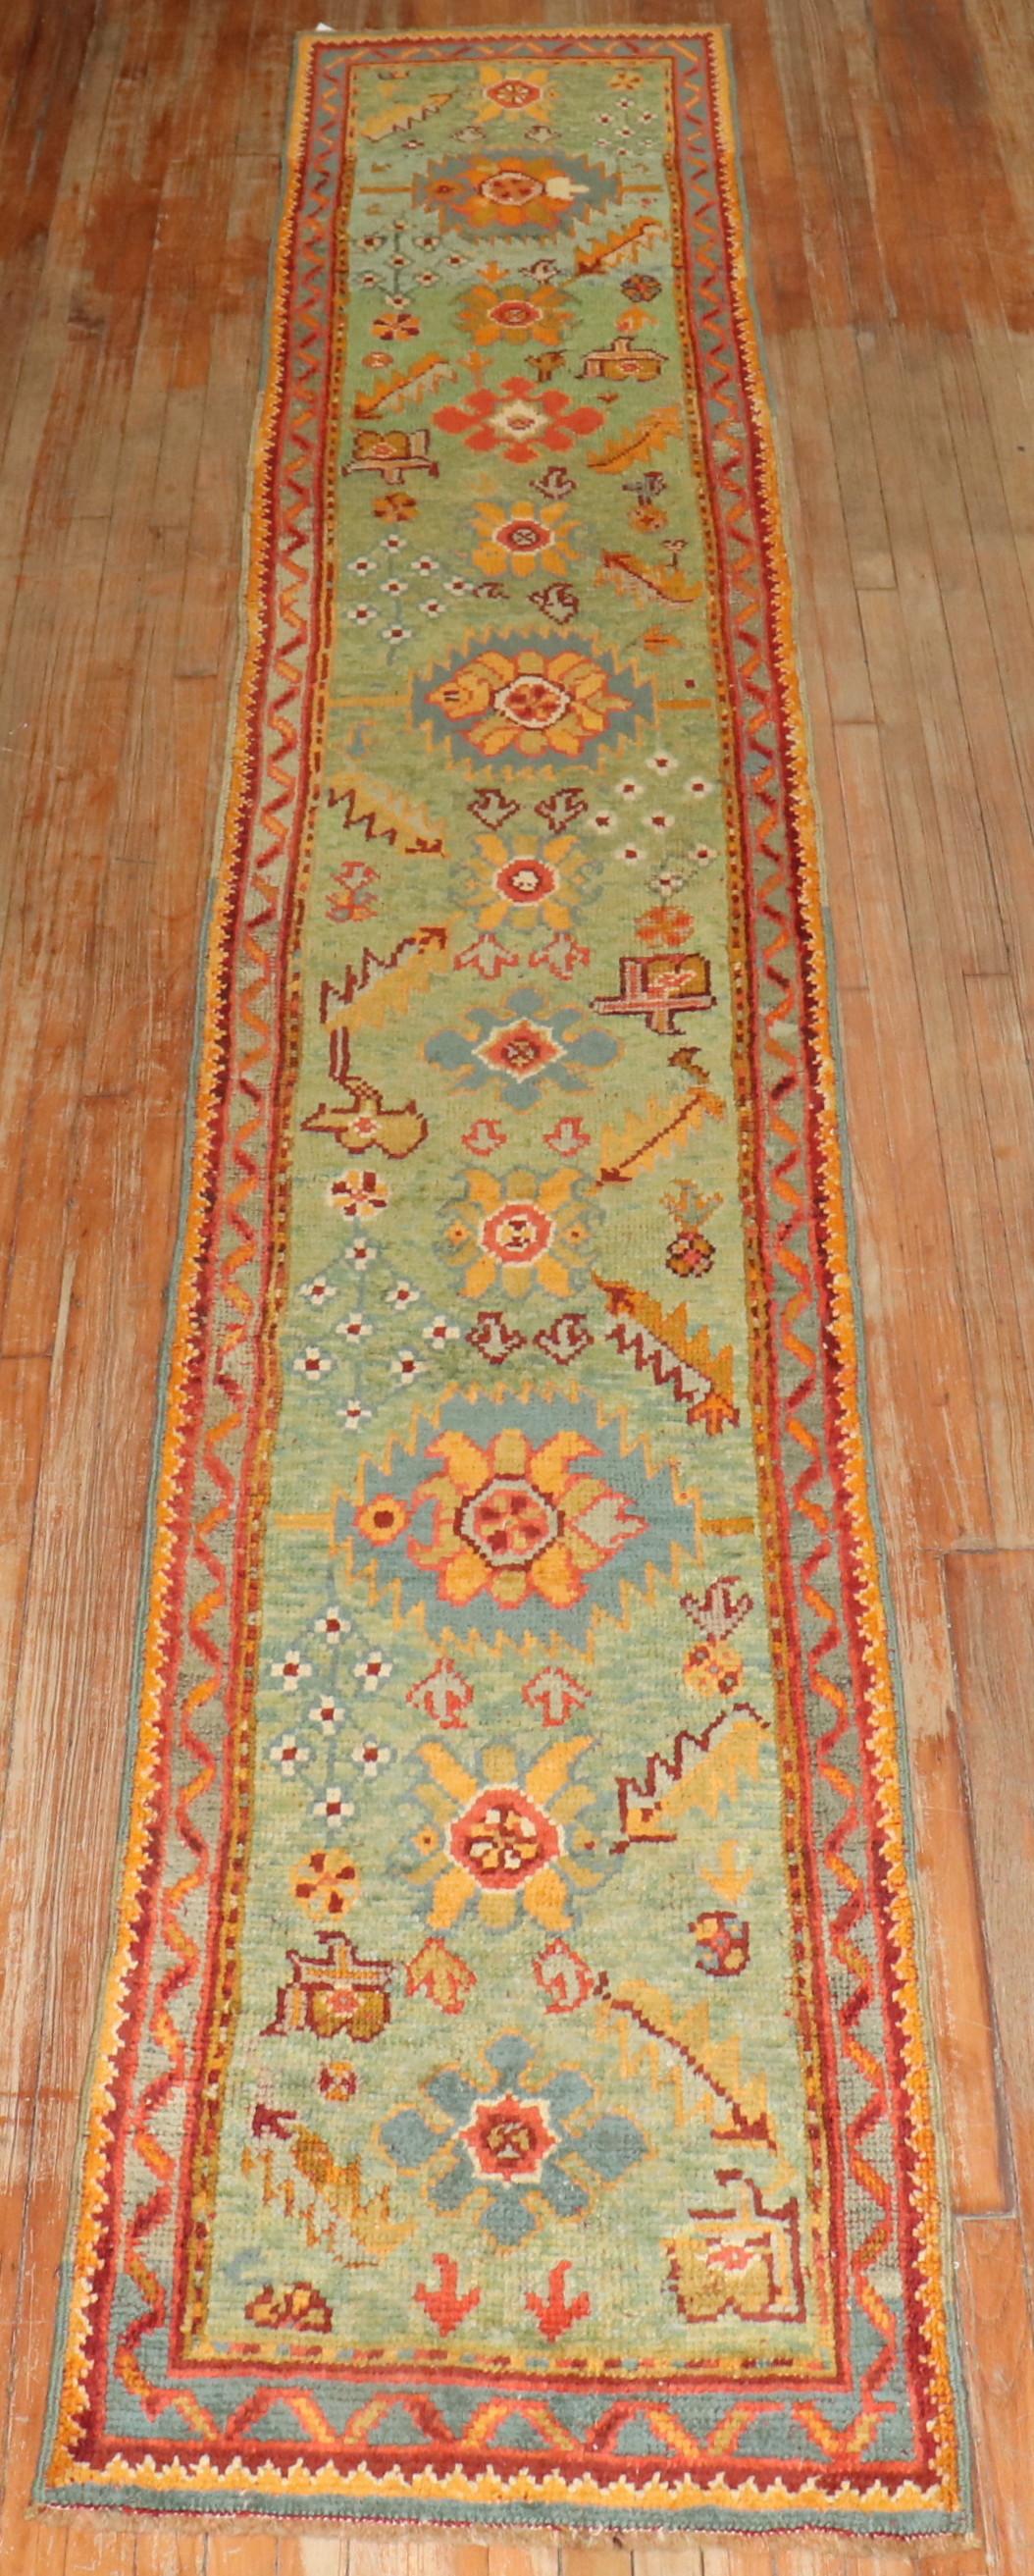 An early 20th century narrow and long bright green field Antique turkish oushak runner.

Size 2'6'' x 15'1''.